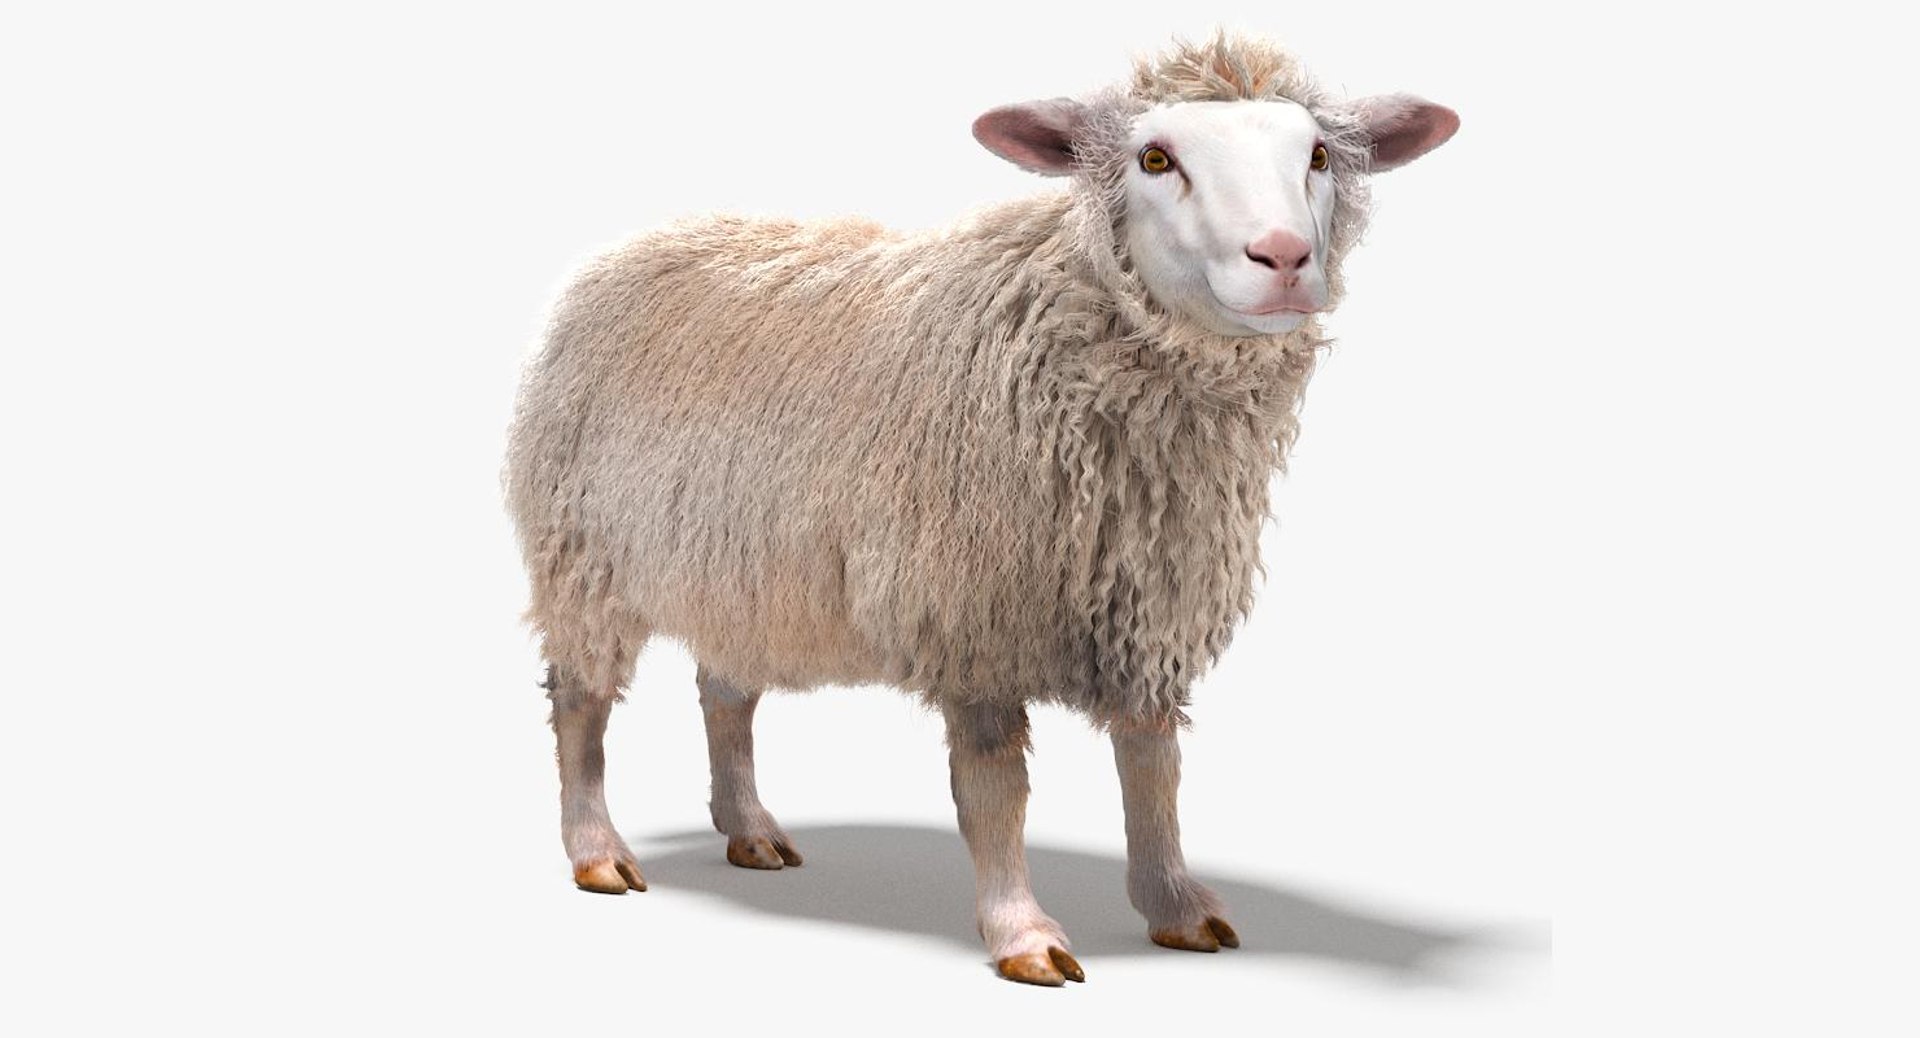 216,454 Sheep Wool Images, Stock Photos, 3D objects, & Vectors